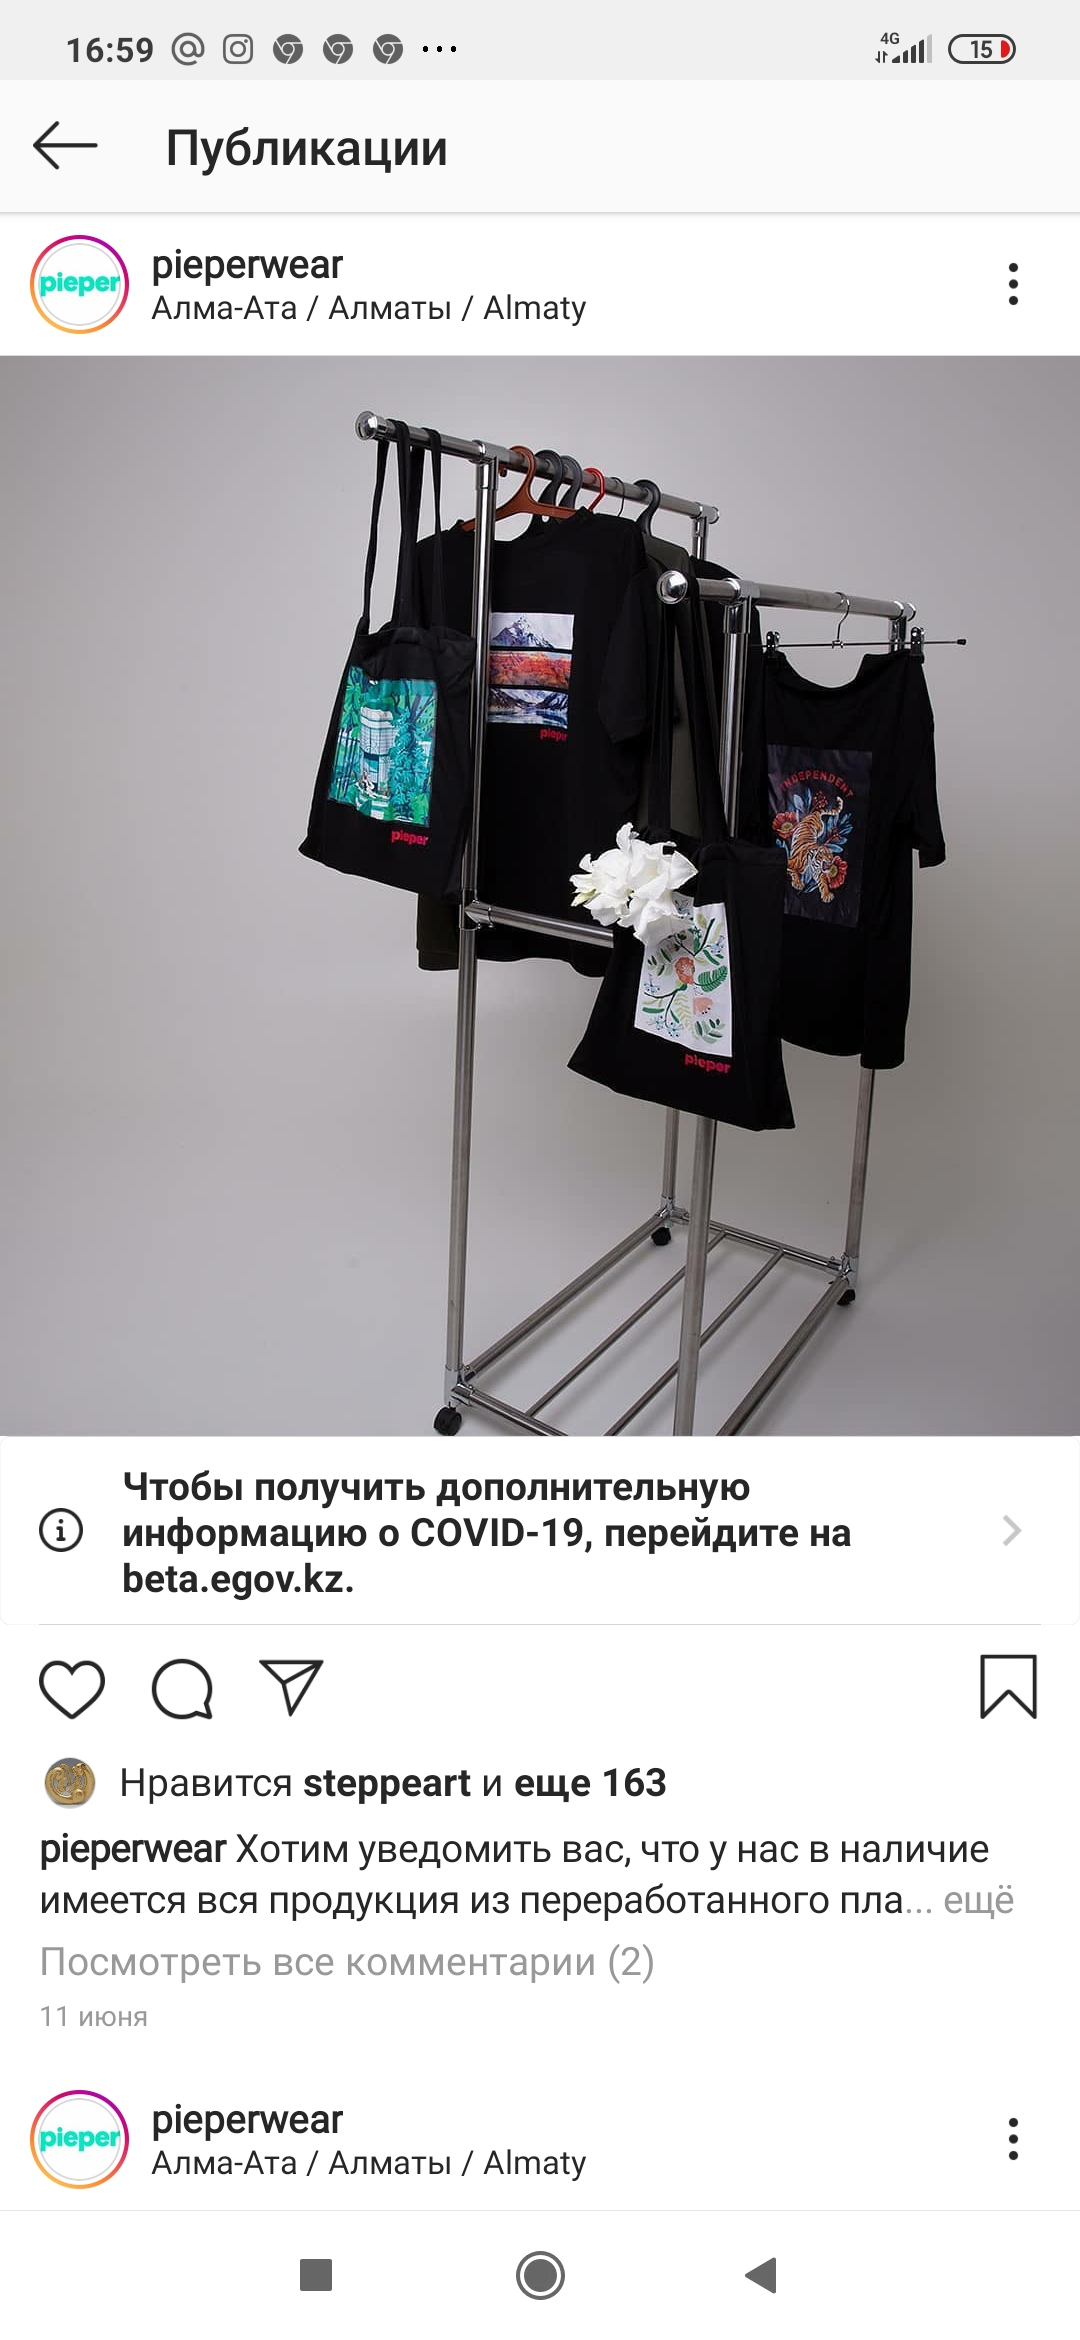 <p>We are looking for fabric from recycled plastic bottles for sewing masks, bags, T-shirts, sweatshirts and jackets. At the initial stage, the purchase volume is from 500-1500 meters, then we will order more.</p>

<p>(translated from russian)</p>